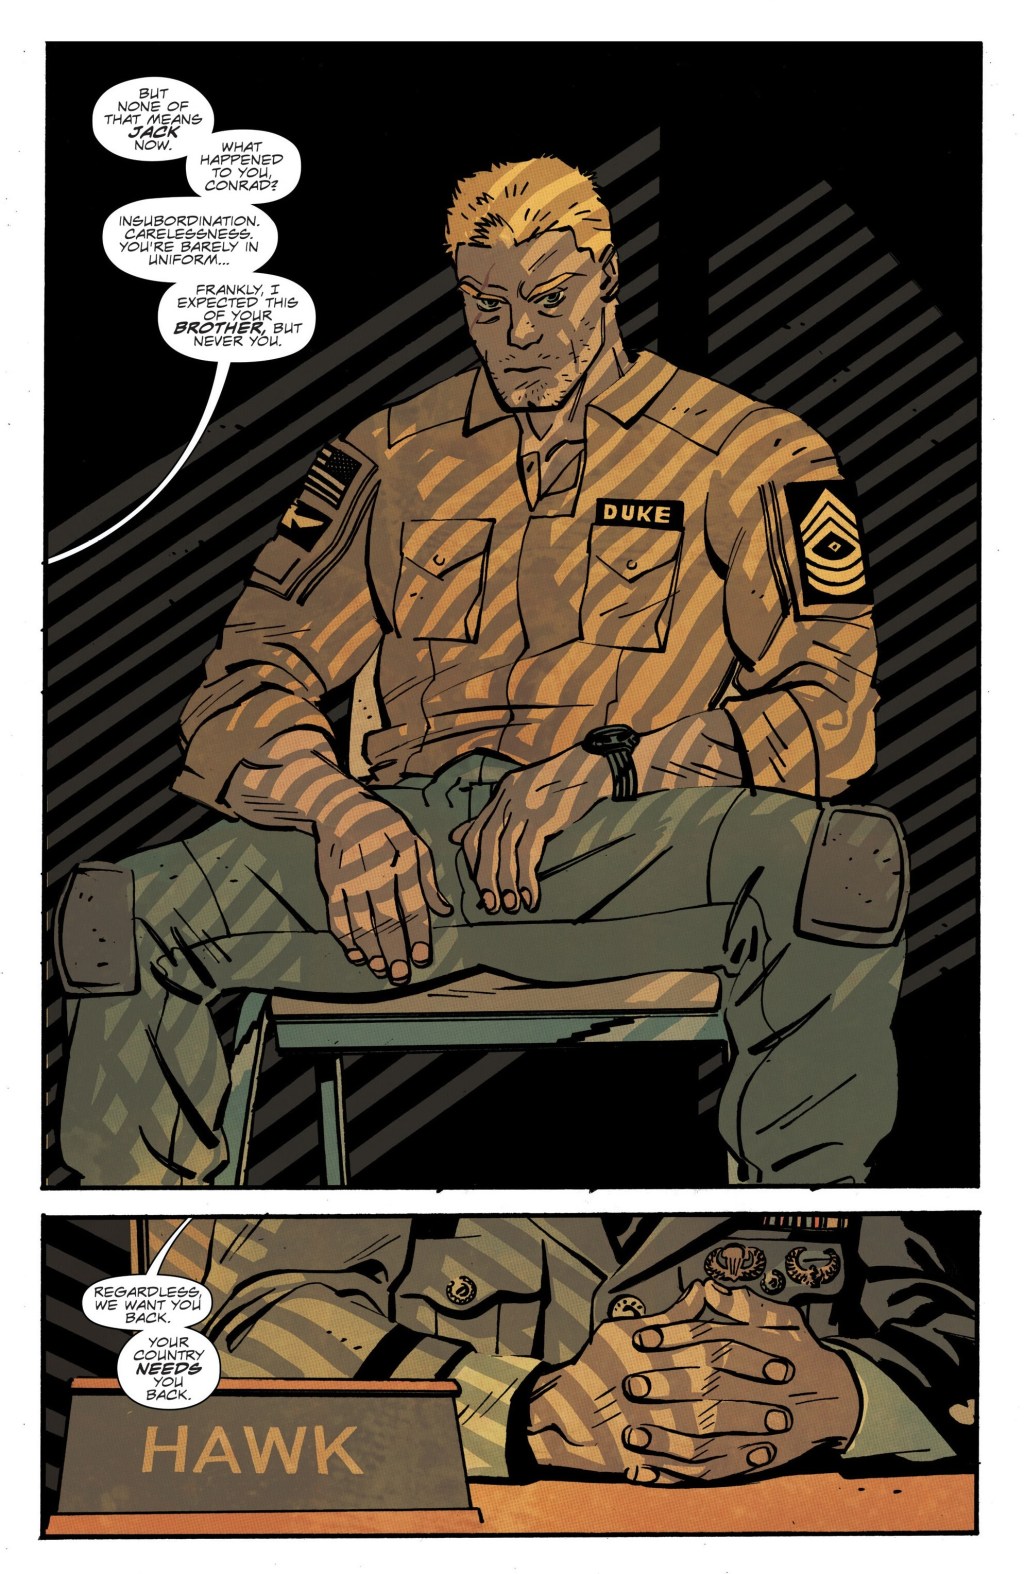 Duke Volume # 1 (2023), Image Comics. Words by Joshua Williamson. Art by Tom Reilly and Jordie Bellaire.